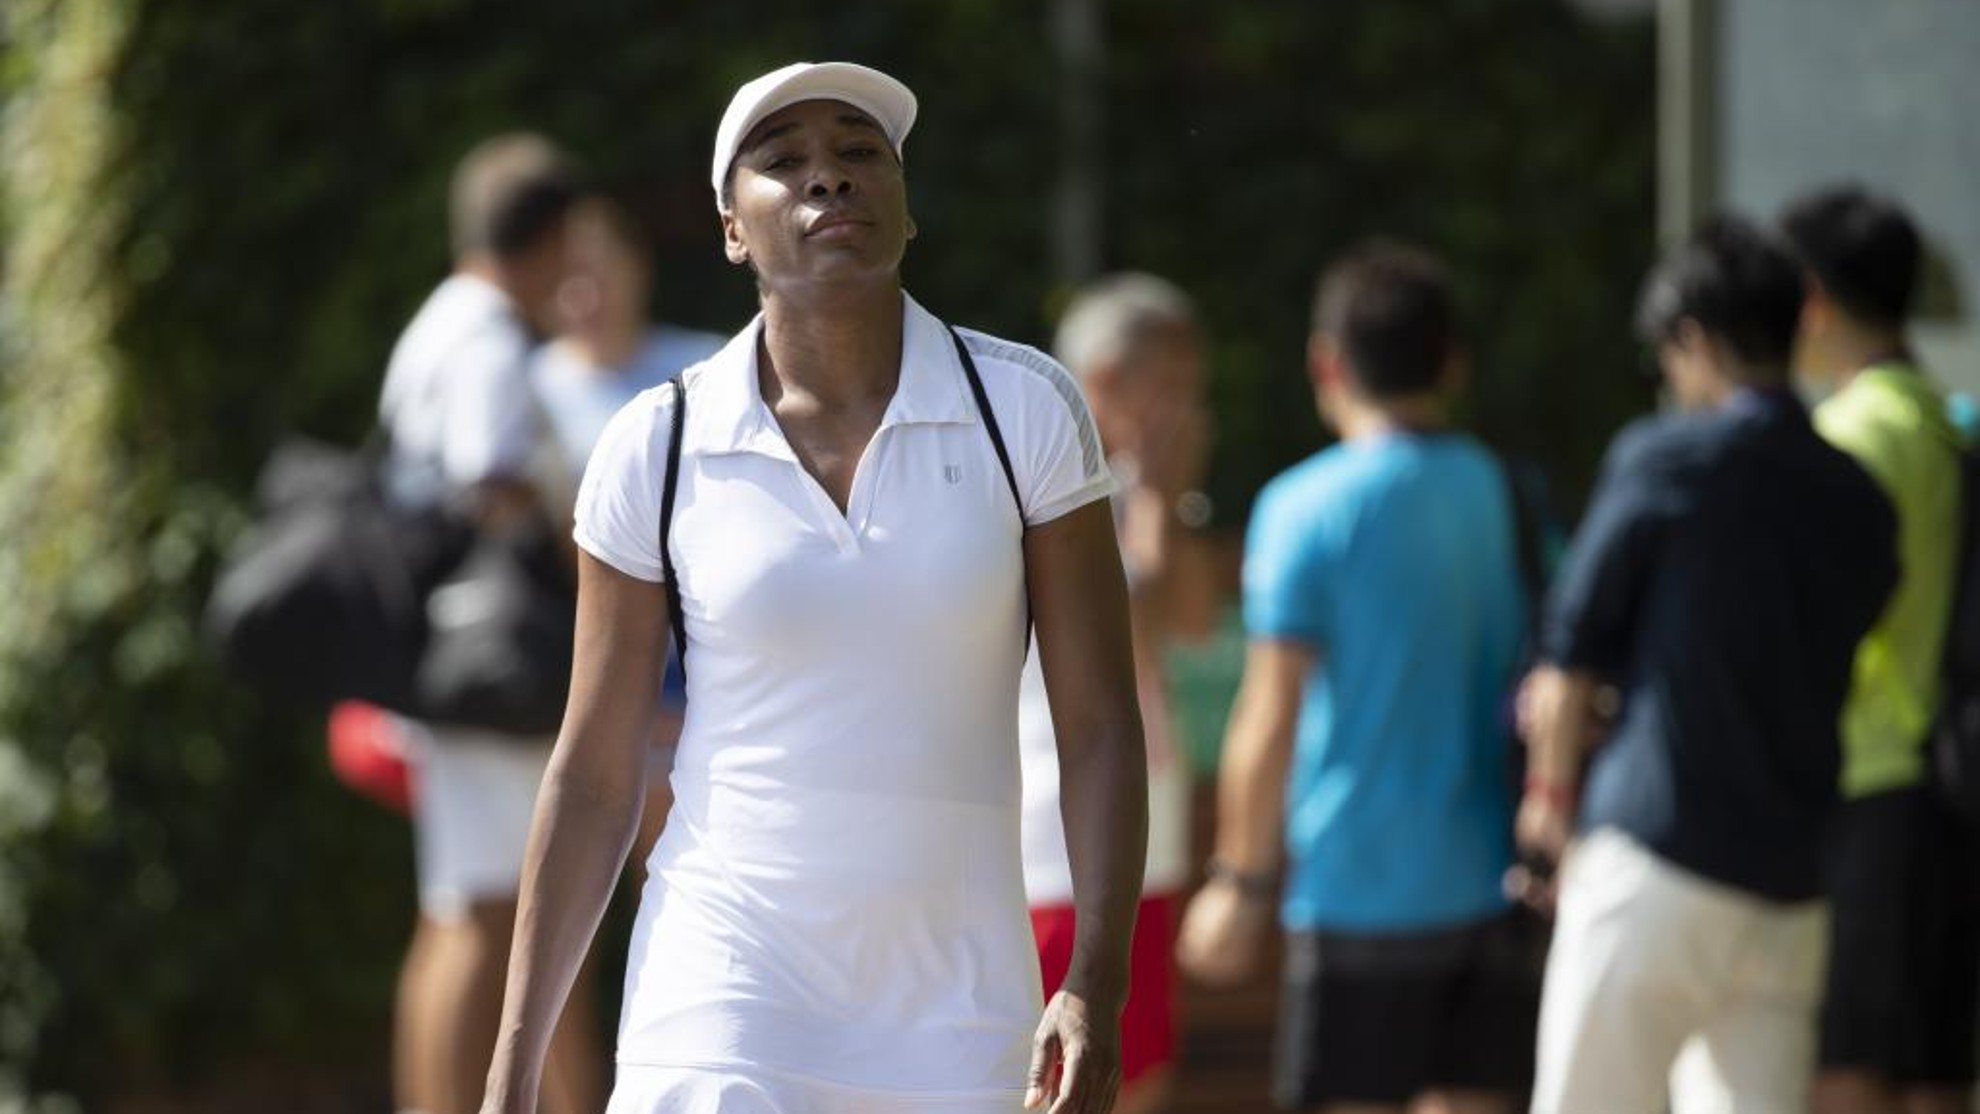 Venus Williams added as wild card for National Bank Open